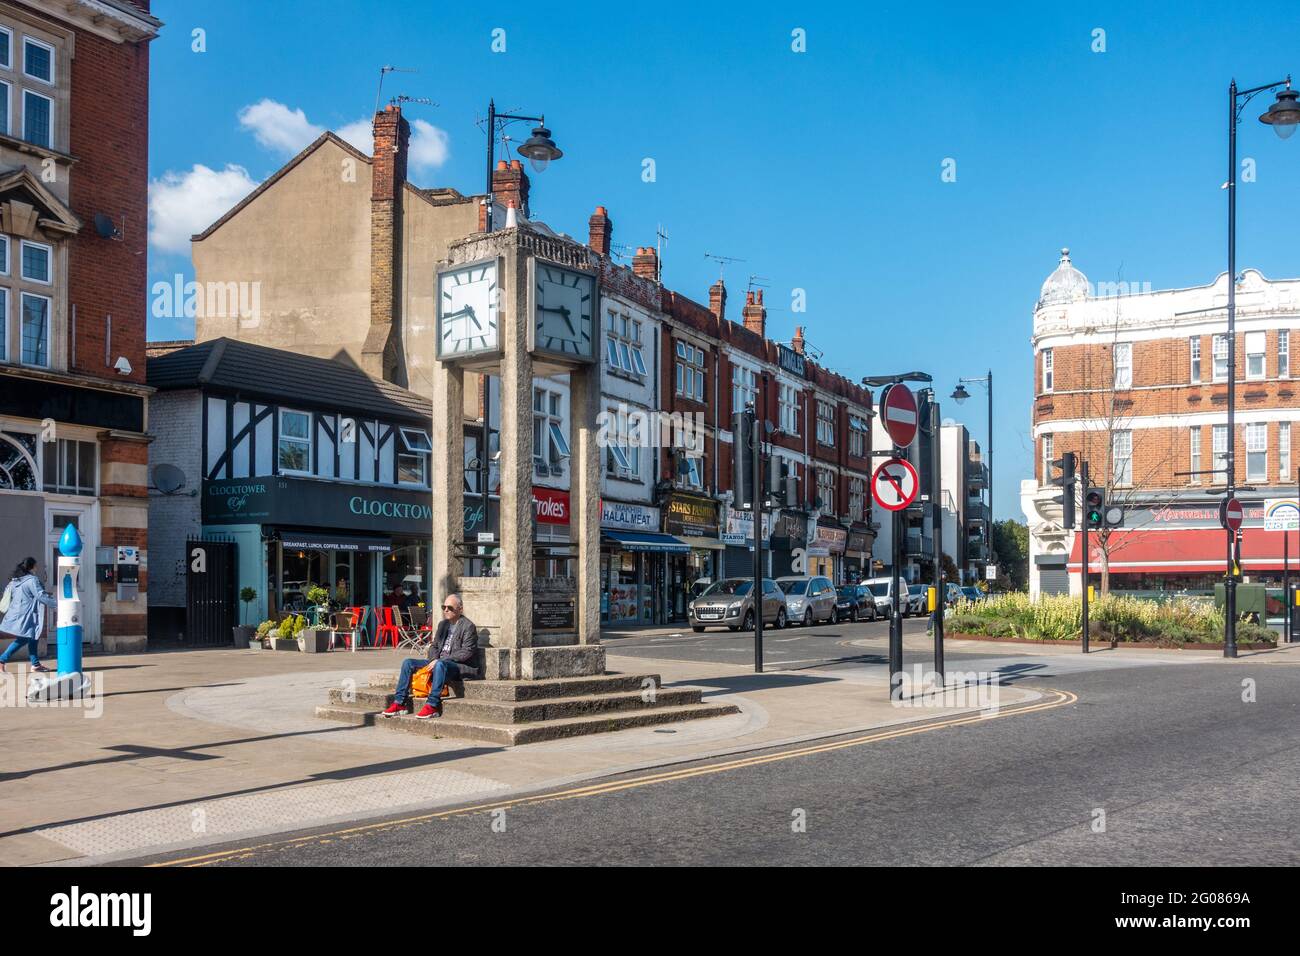 The clock tower on Hanwell Broadway in the centre of Hanwell town in The London Borough of Ealing. Stock Photo